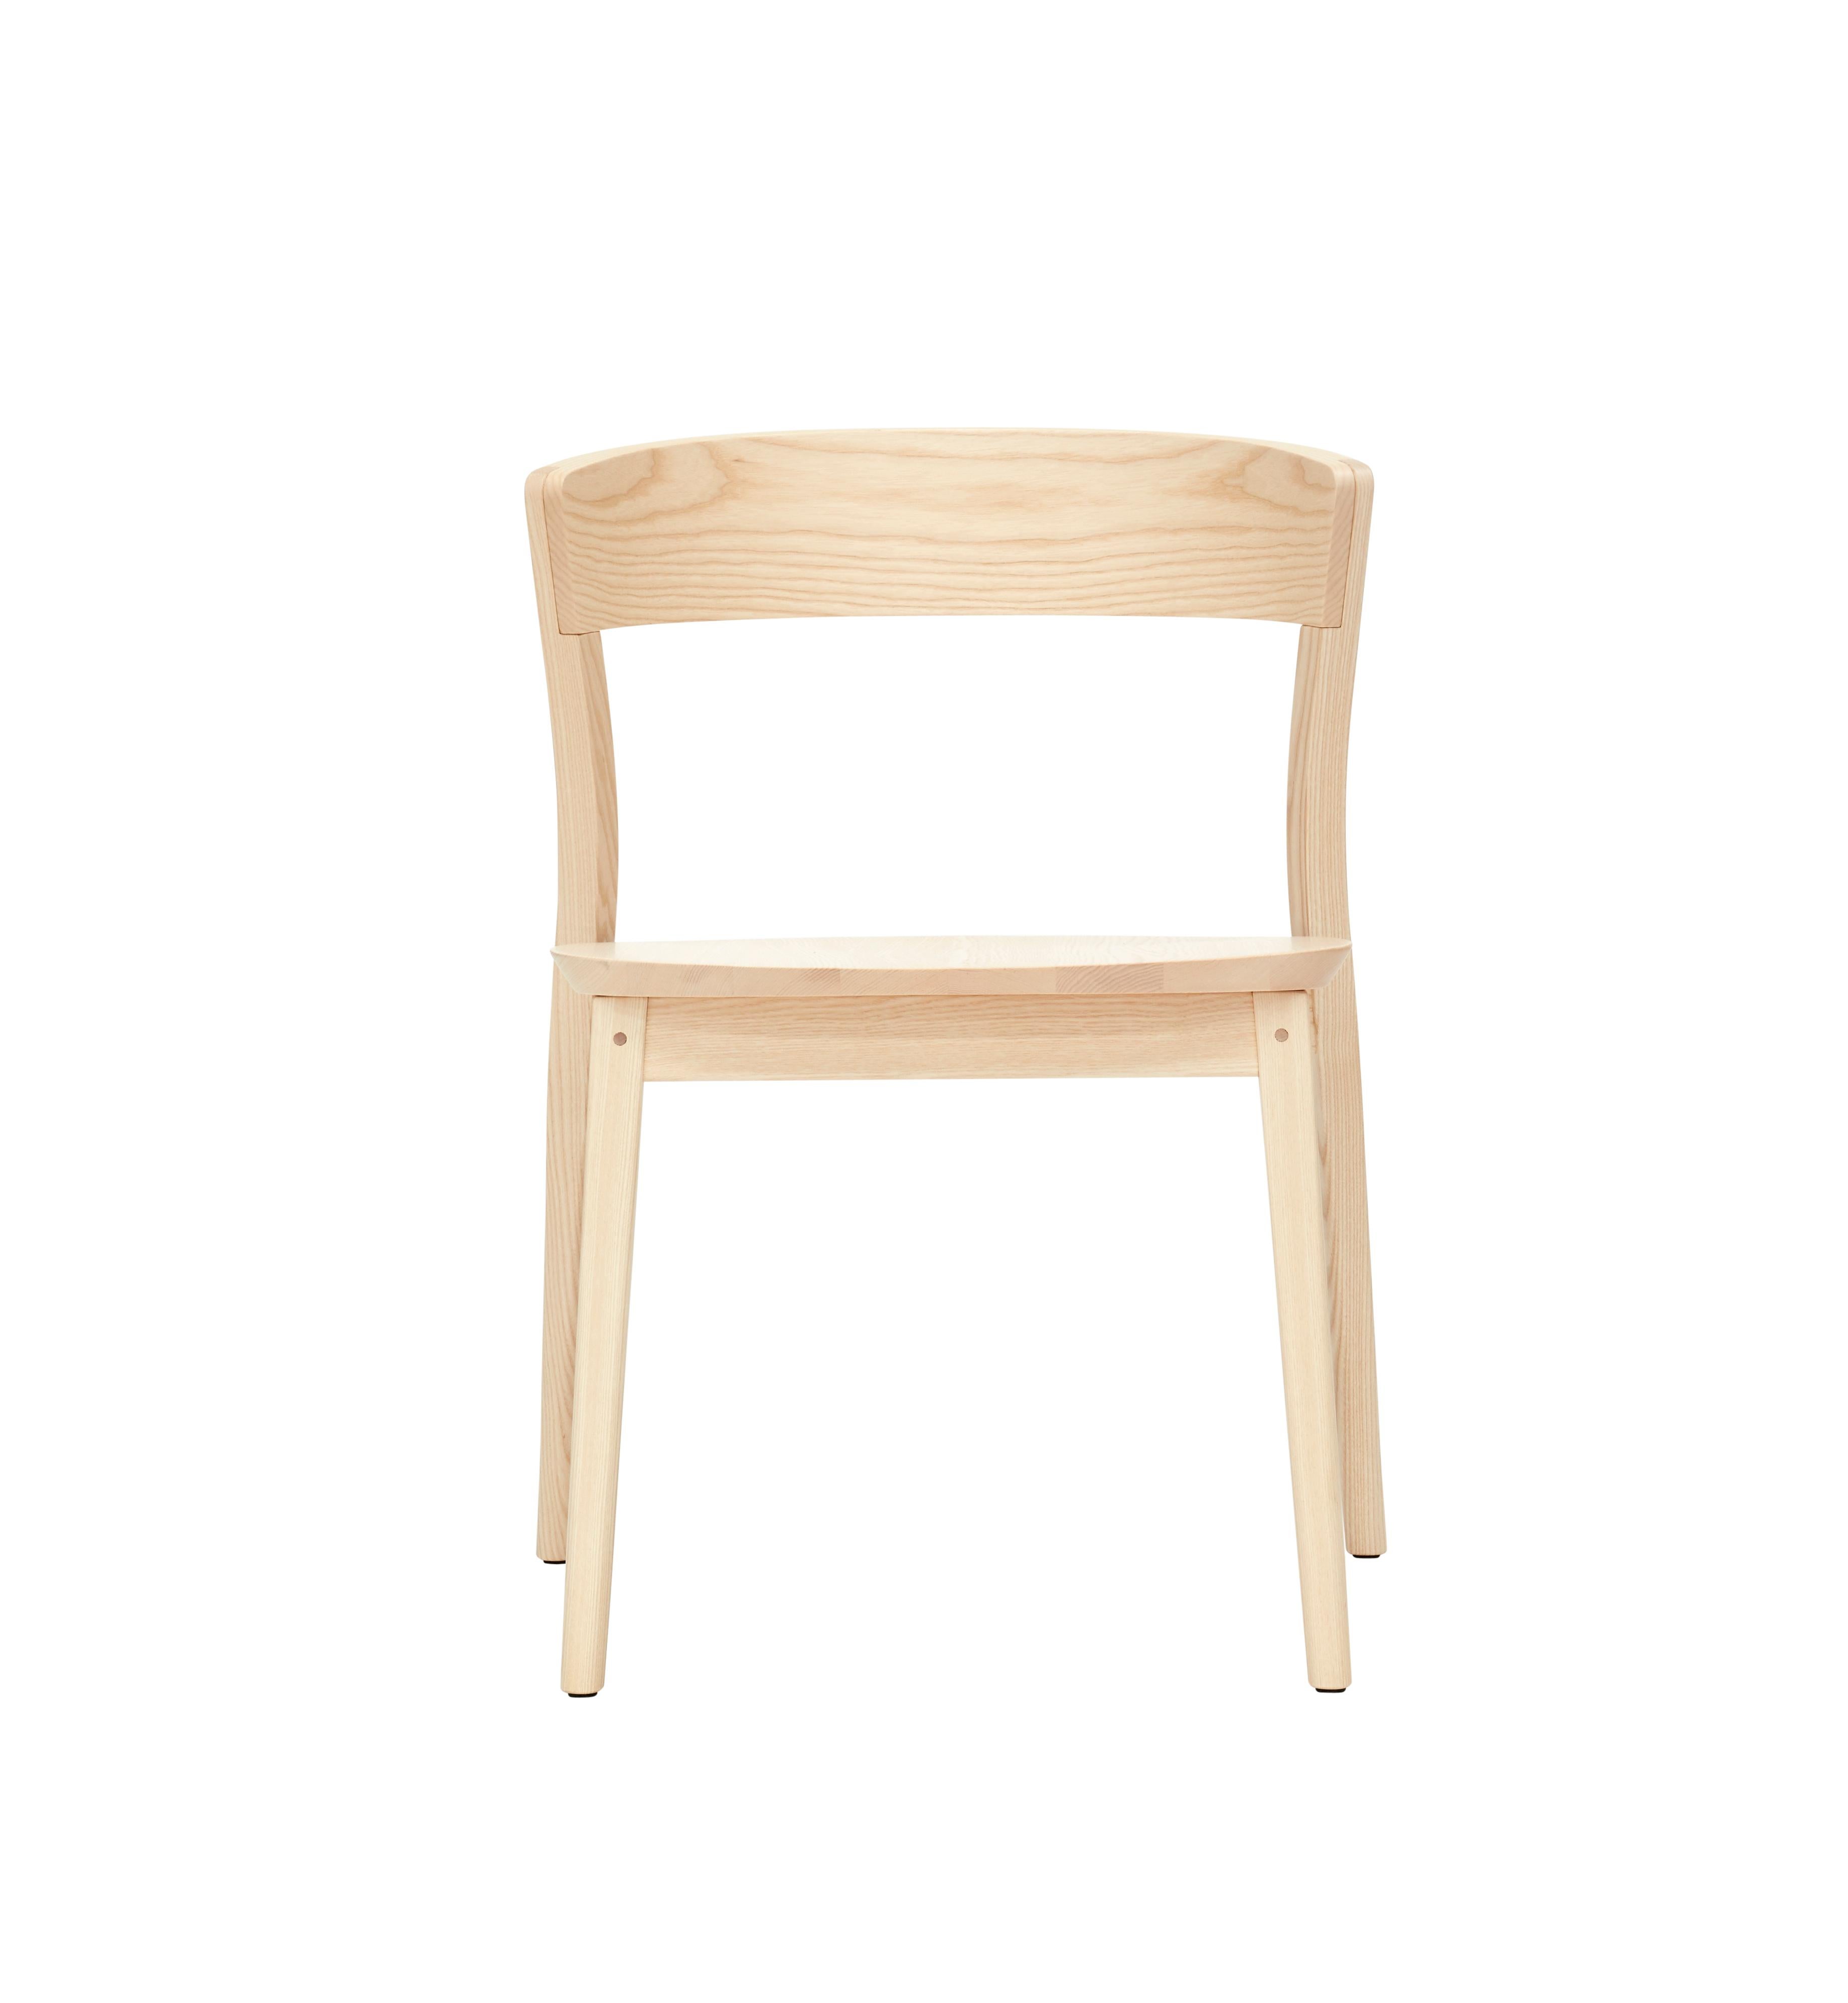 Contemporary interpretation of the classic bistro chair, Clarke was designed for comfort. Made from solid ash, this sculpted piece is defined by fine details and subtle curves and angles. Fine craftsmanship highlights the sculpted solid timber seat